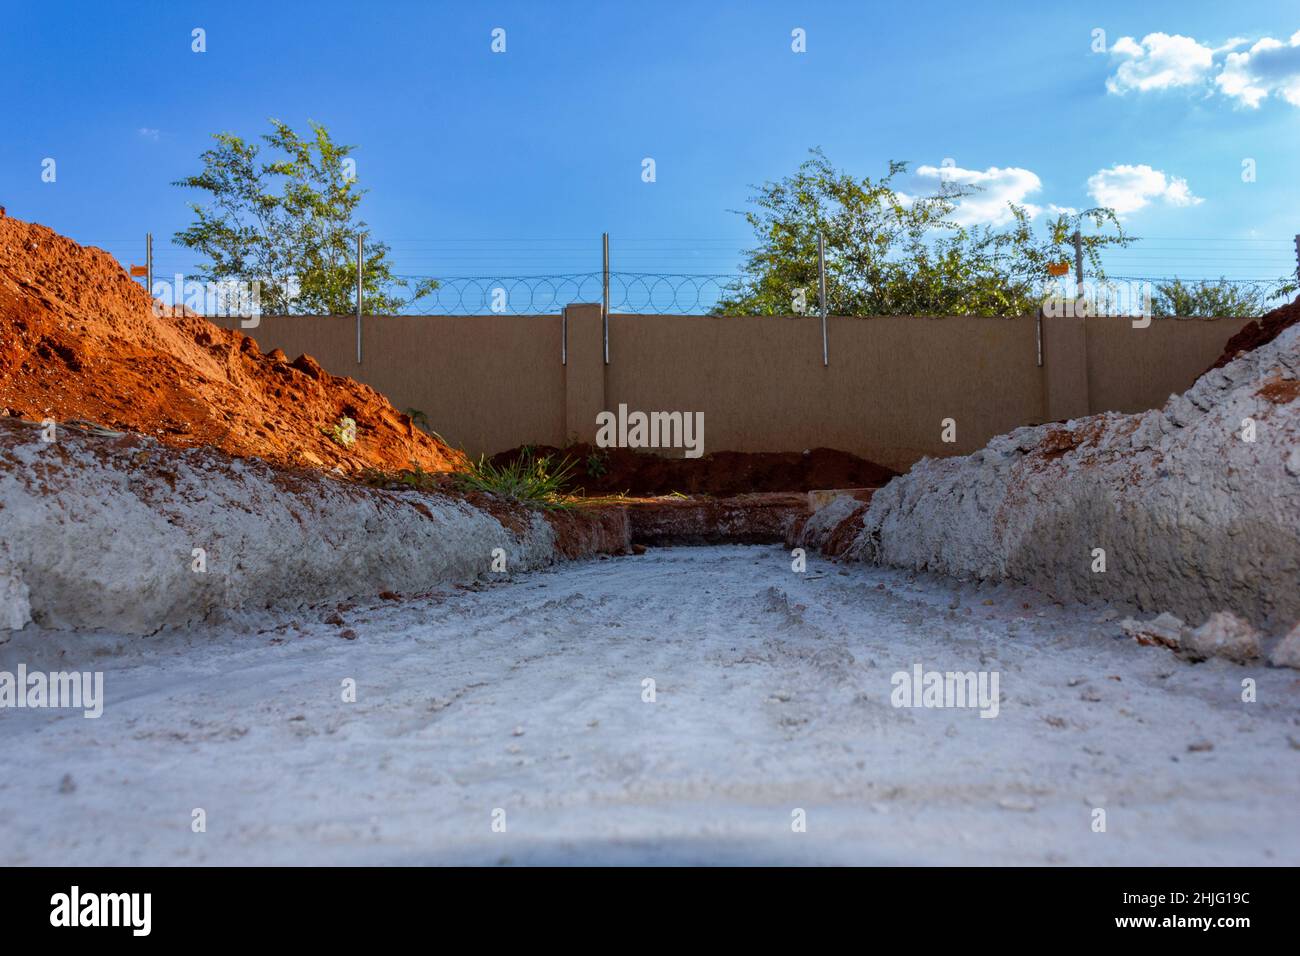 Selective focus on freshly poured concrete foundations for a building Stock Photo